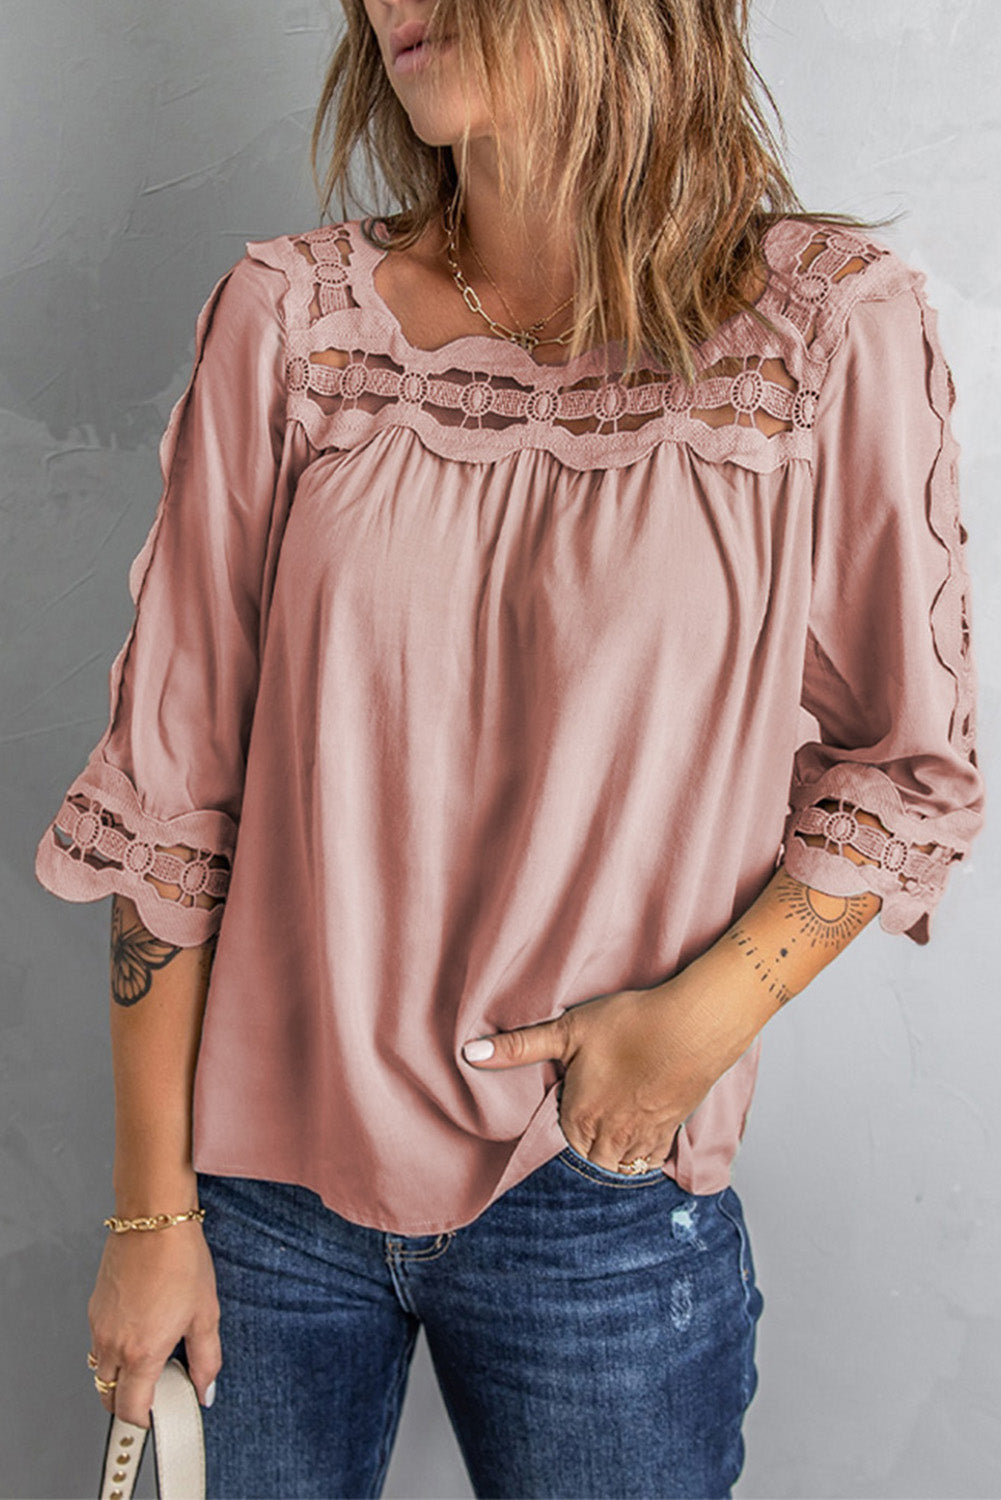 Blouse Rose Chic Femme Col Carre